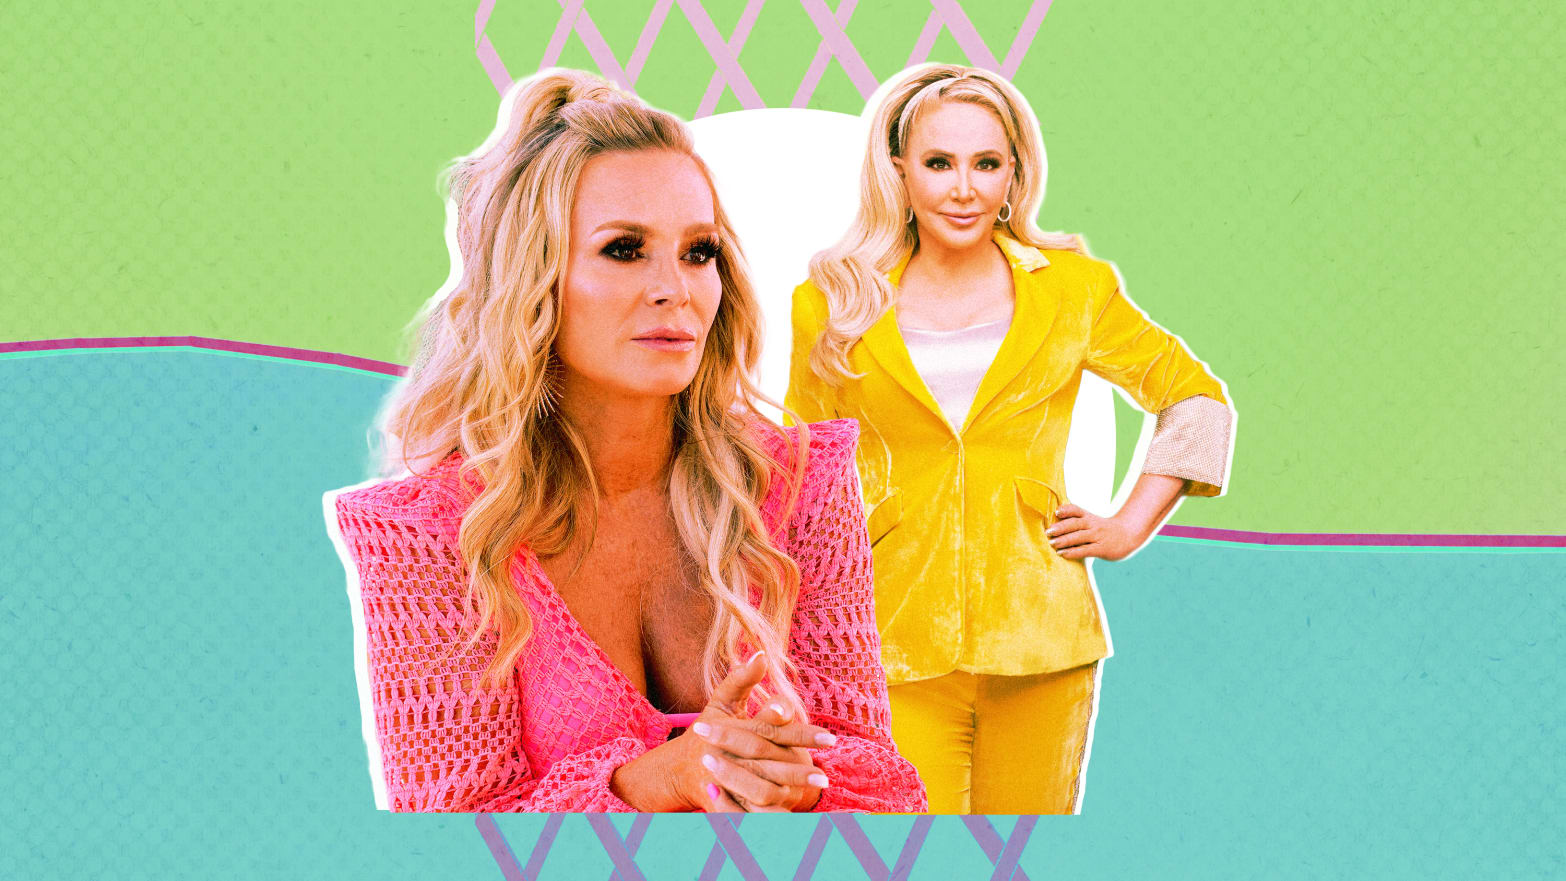 A photo illustration of Tamra Judge and Shannon Beador in production stills from RHOC.